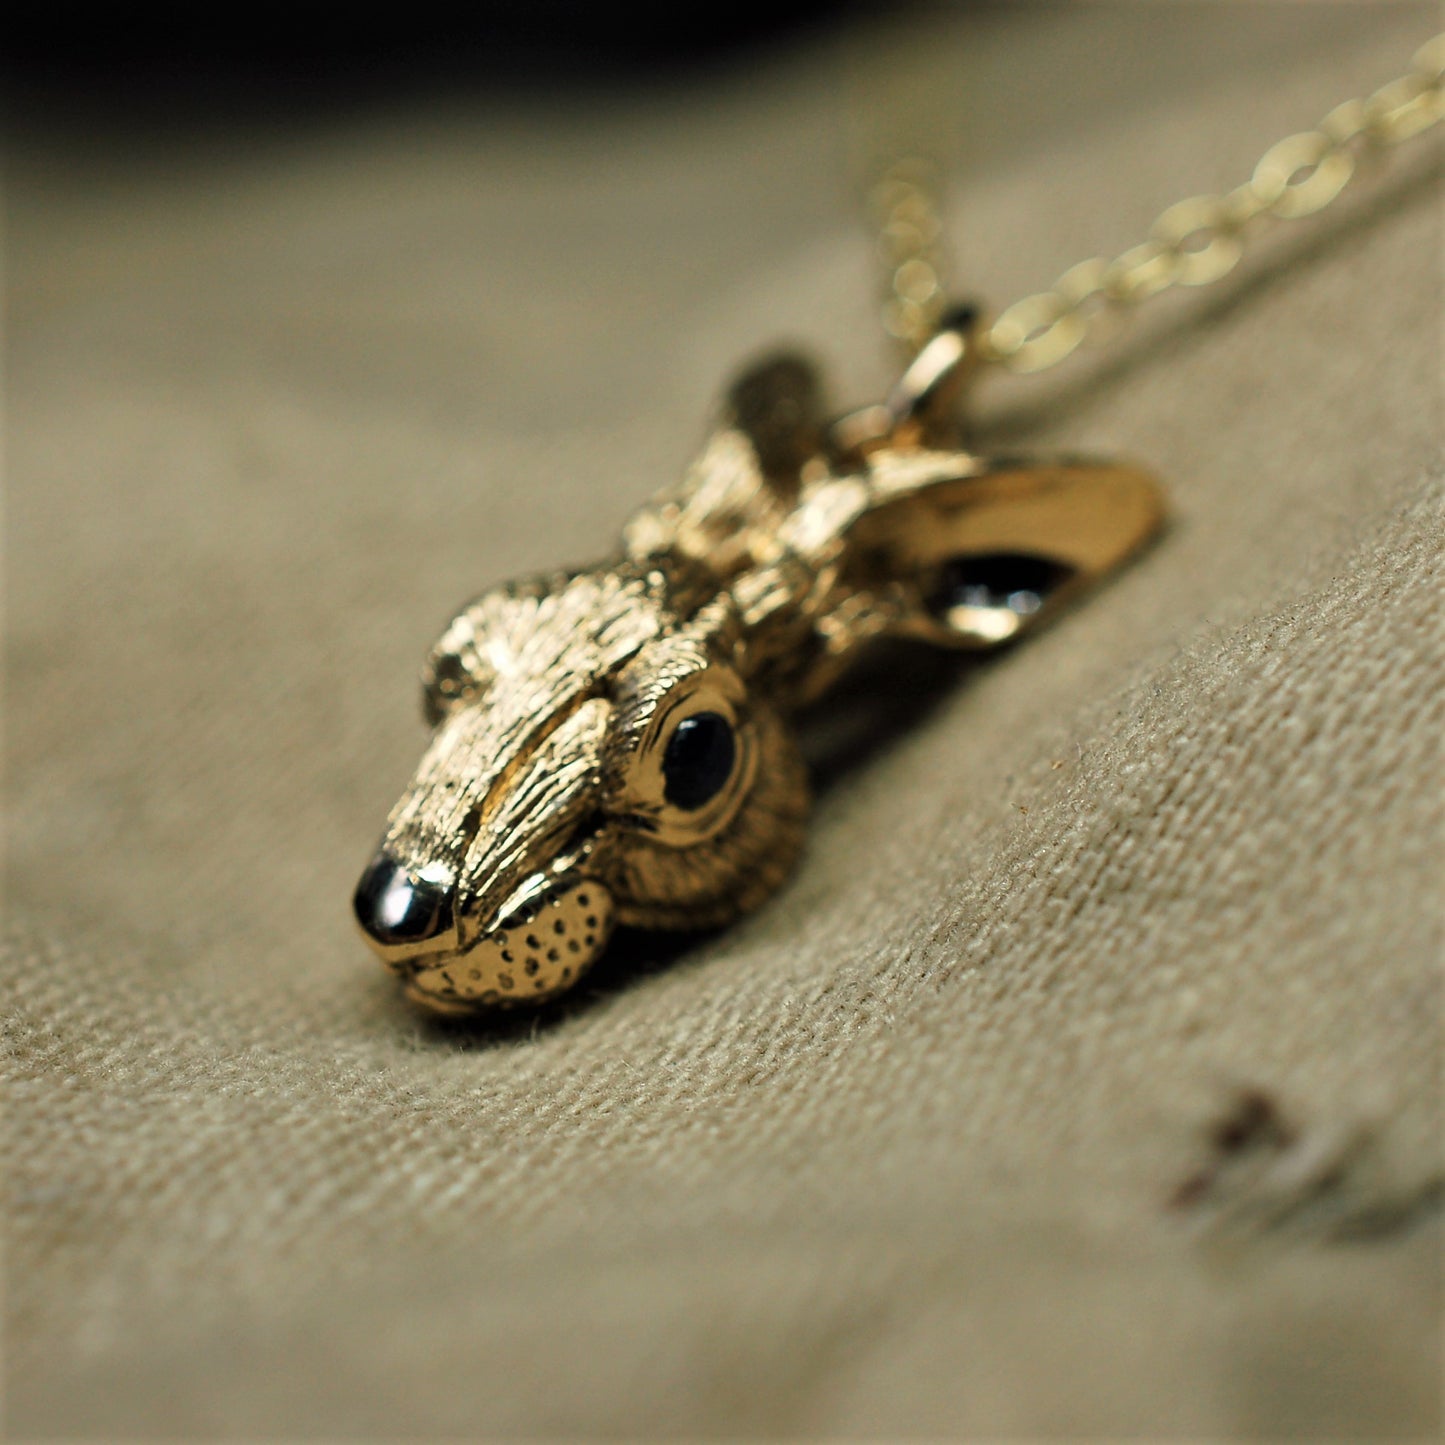 Gold rabbit necklace. Gold hare pendant with green peridot eyes and a gold chain. Hand made to order in the UK. © Adrian Ashley